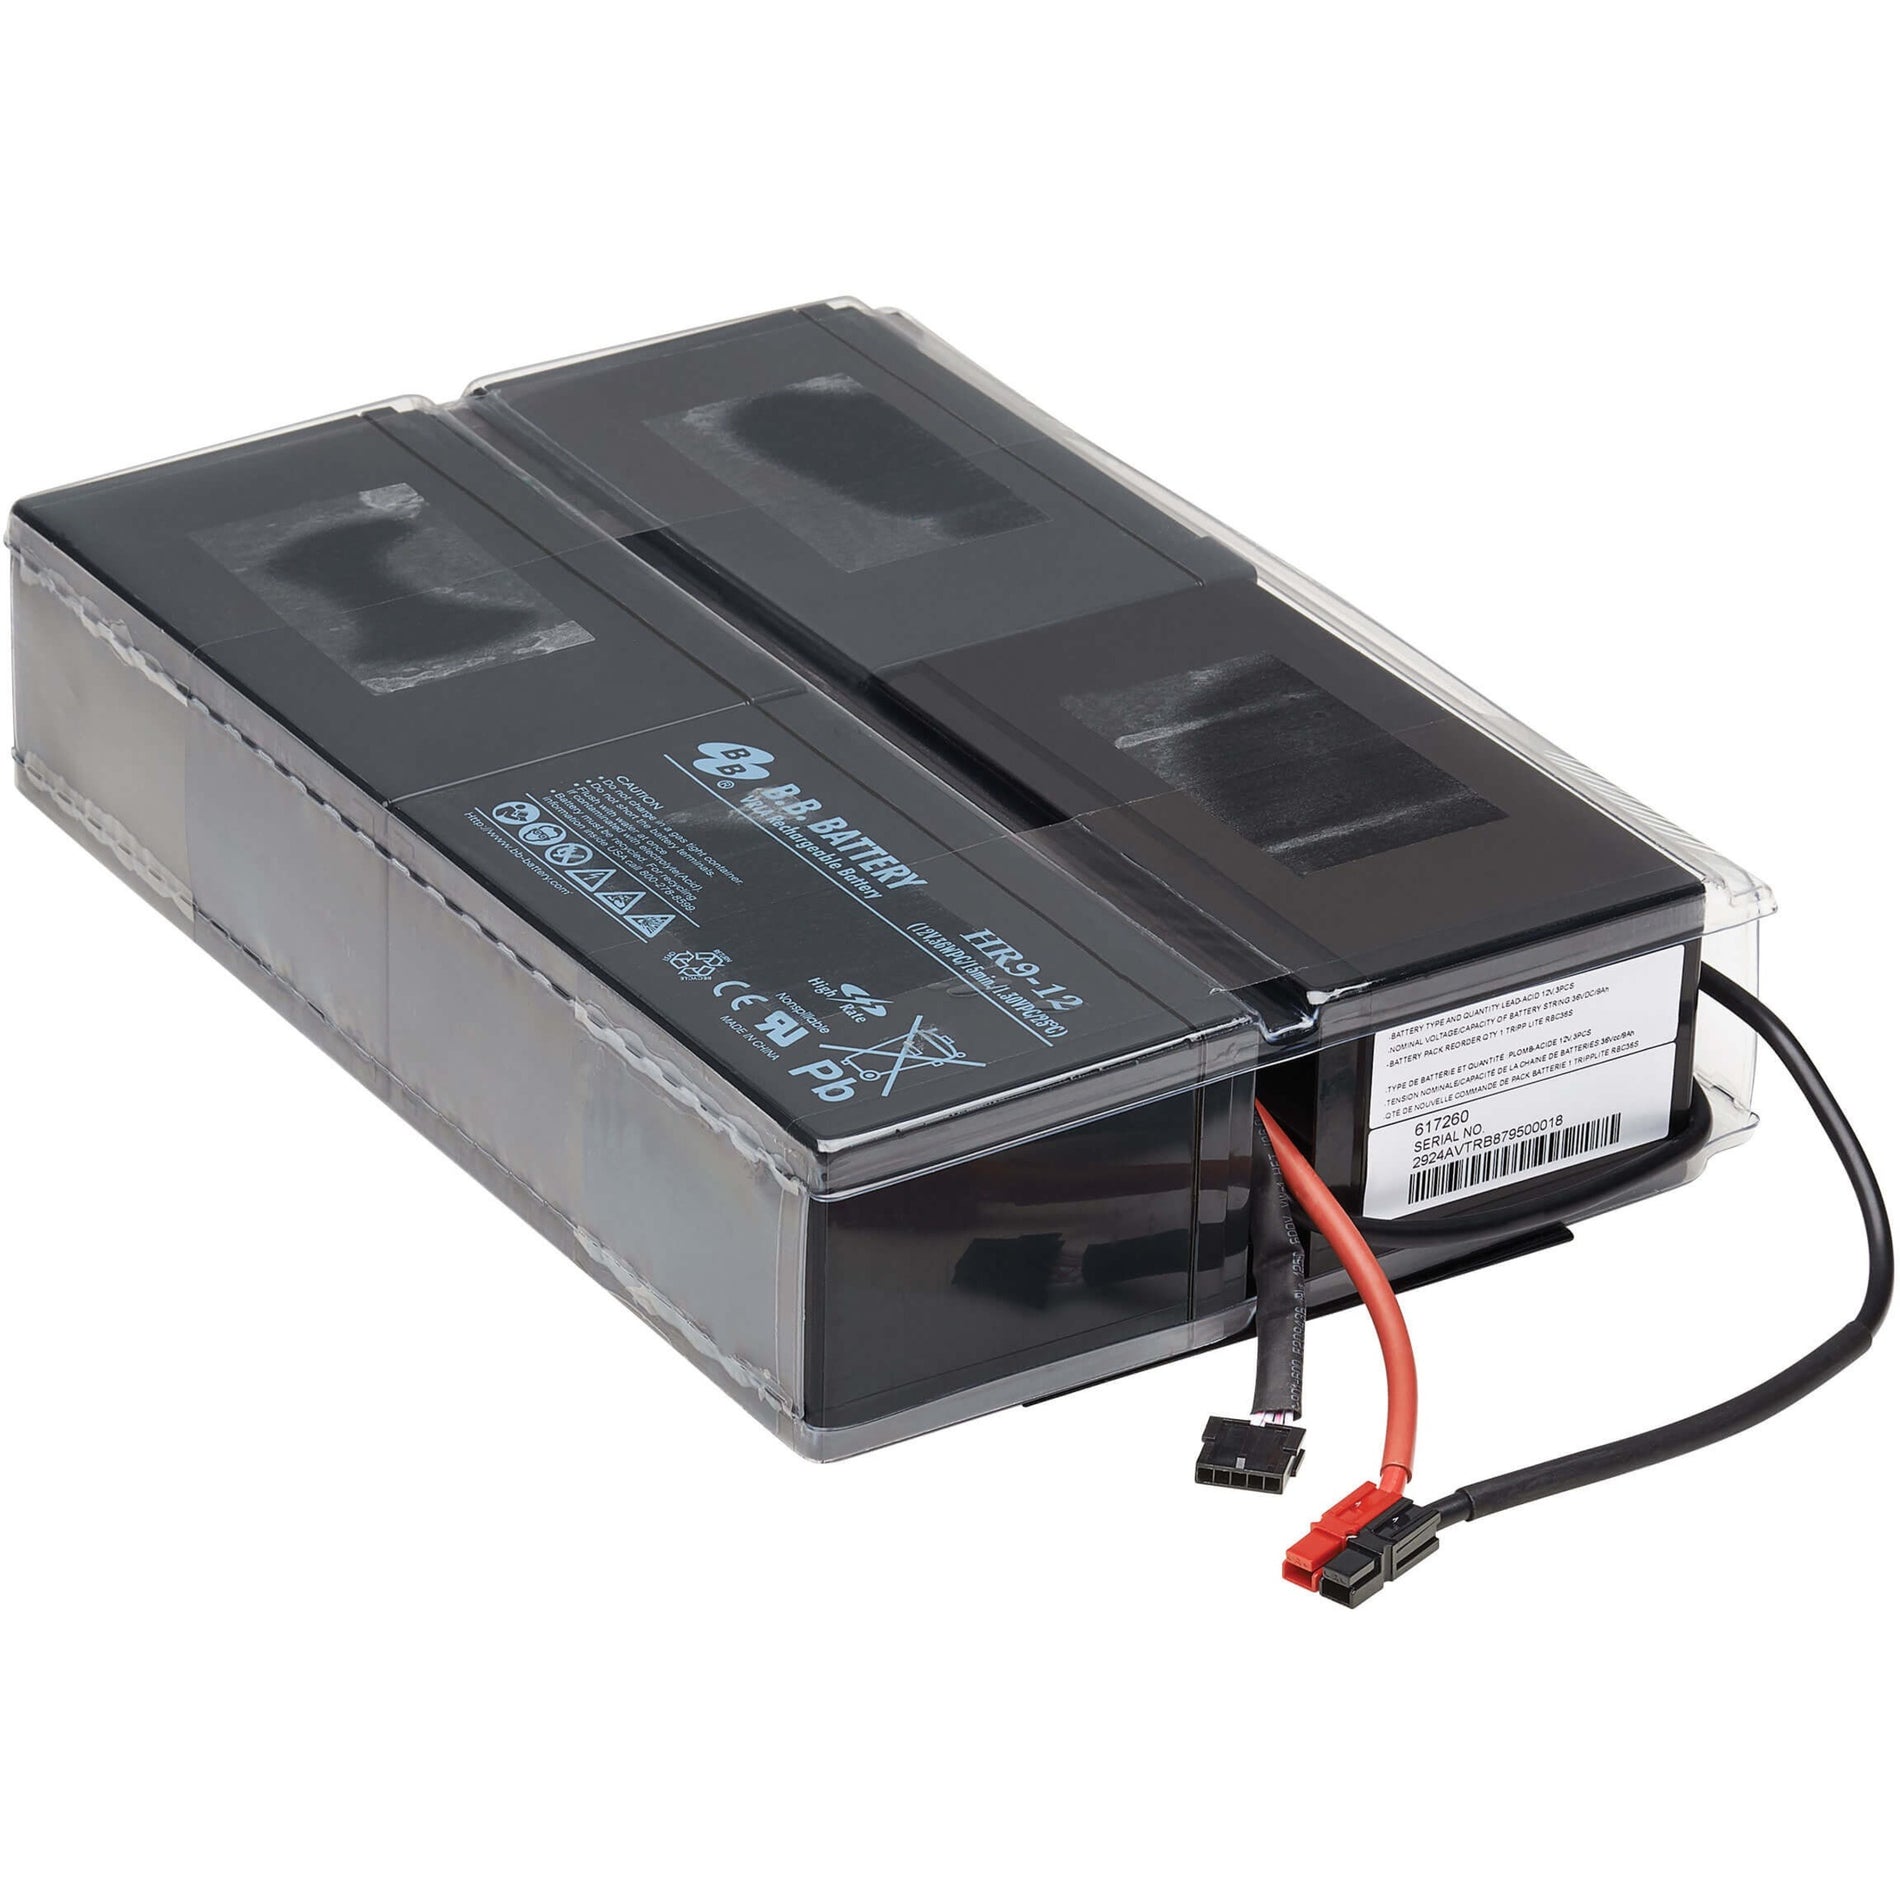 Tripp Lite RBC36S UPS Replacement Battery Cartridge for SUINT1500LCD2U UPS System, 36V